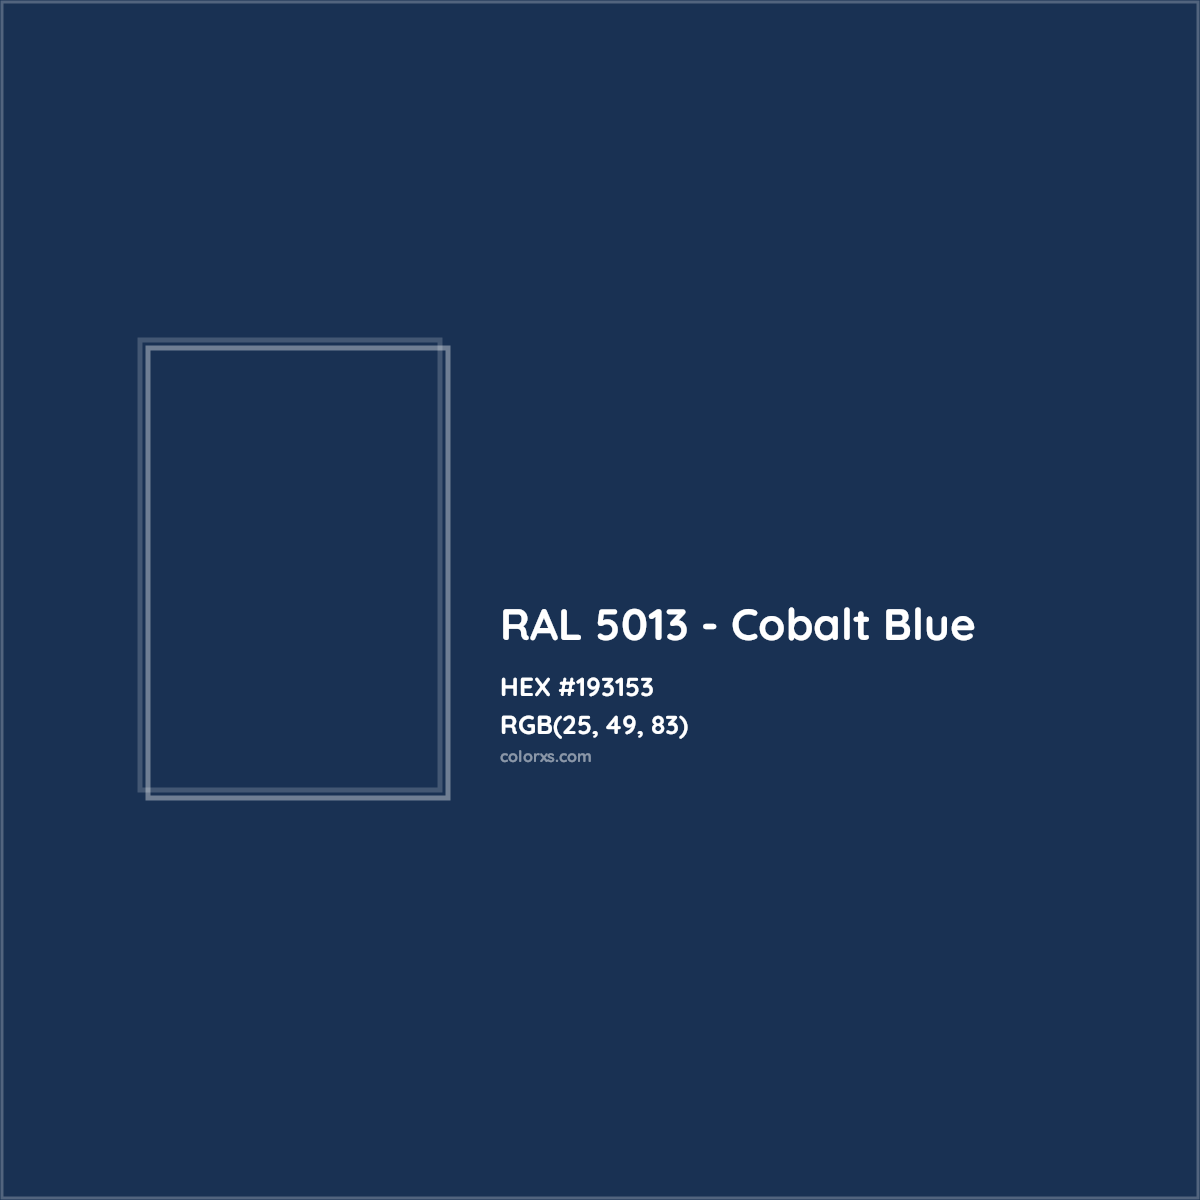 HEX #193153 RAL 5013 - Cobalt Blue CMS RAL Classic - Color Code